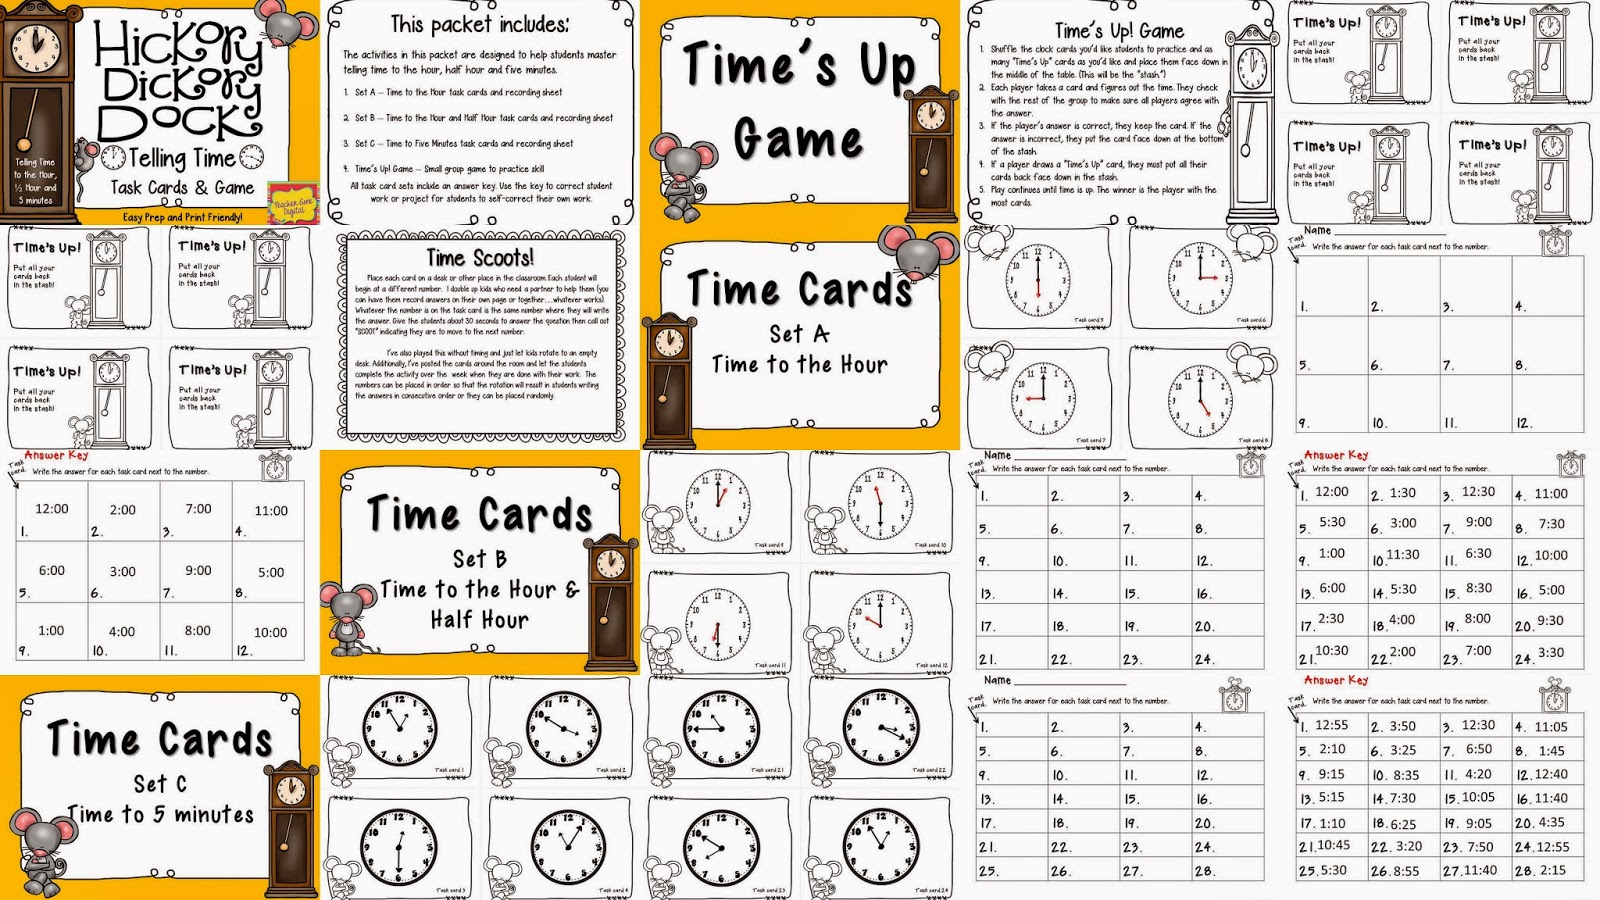 https://www.teacherspayteachers.com/Product/Hickory-Dickory-Dock-Telling-Time-Activities-and-Game-1752728